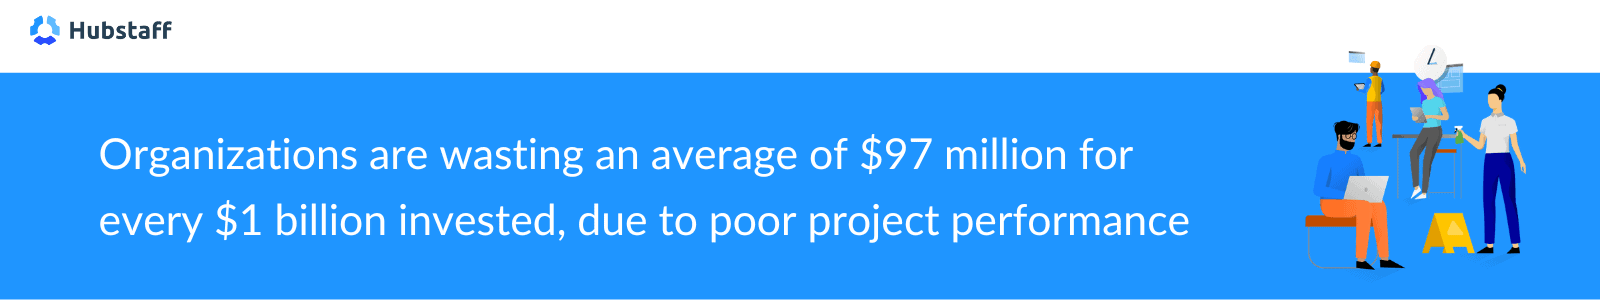 Organizations are wasting an average of $97 million for every $1 billion invested due to poor project performance.